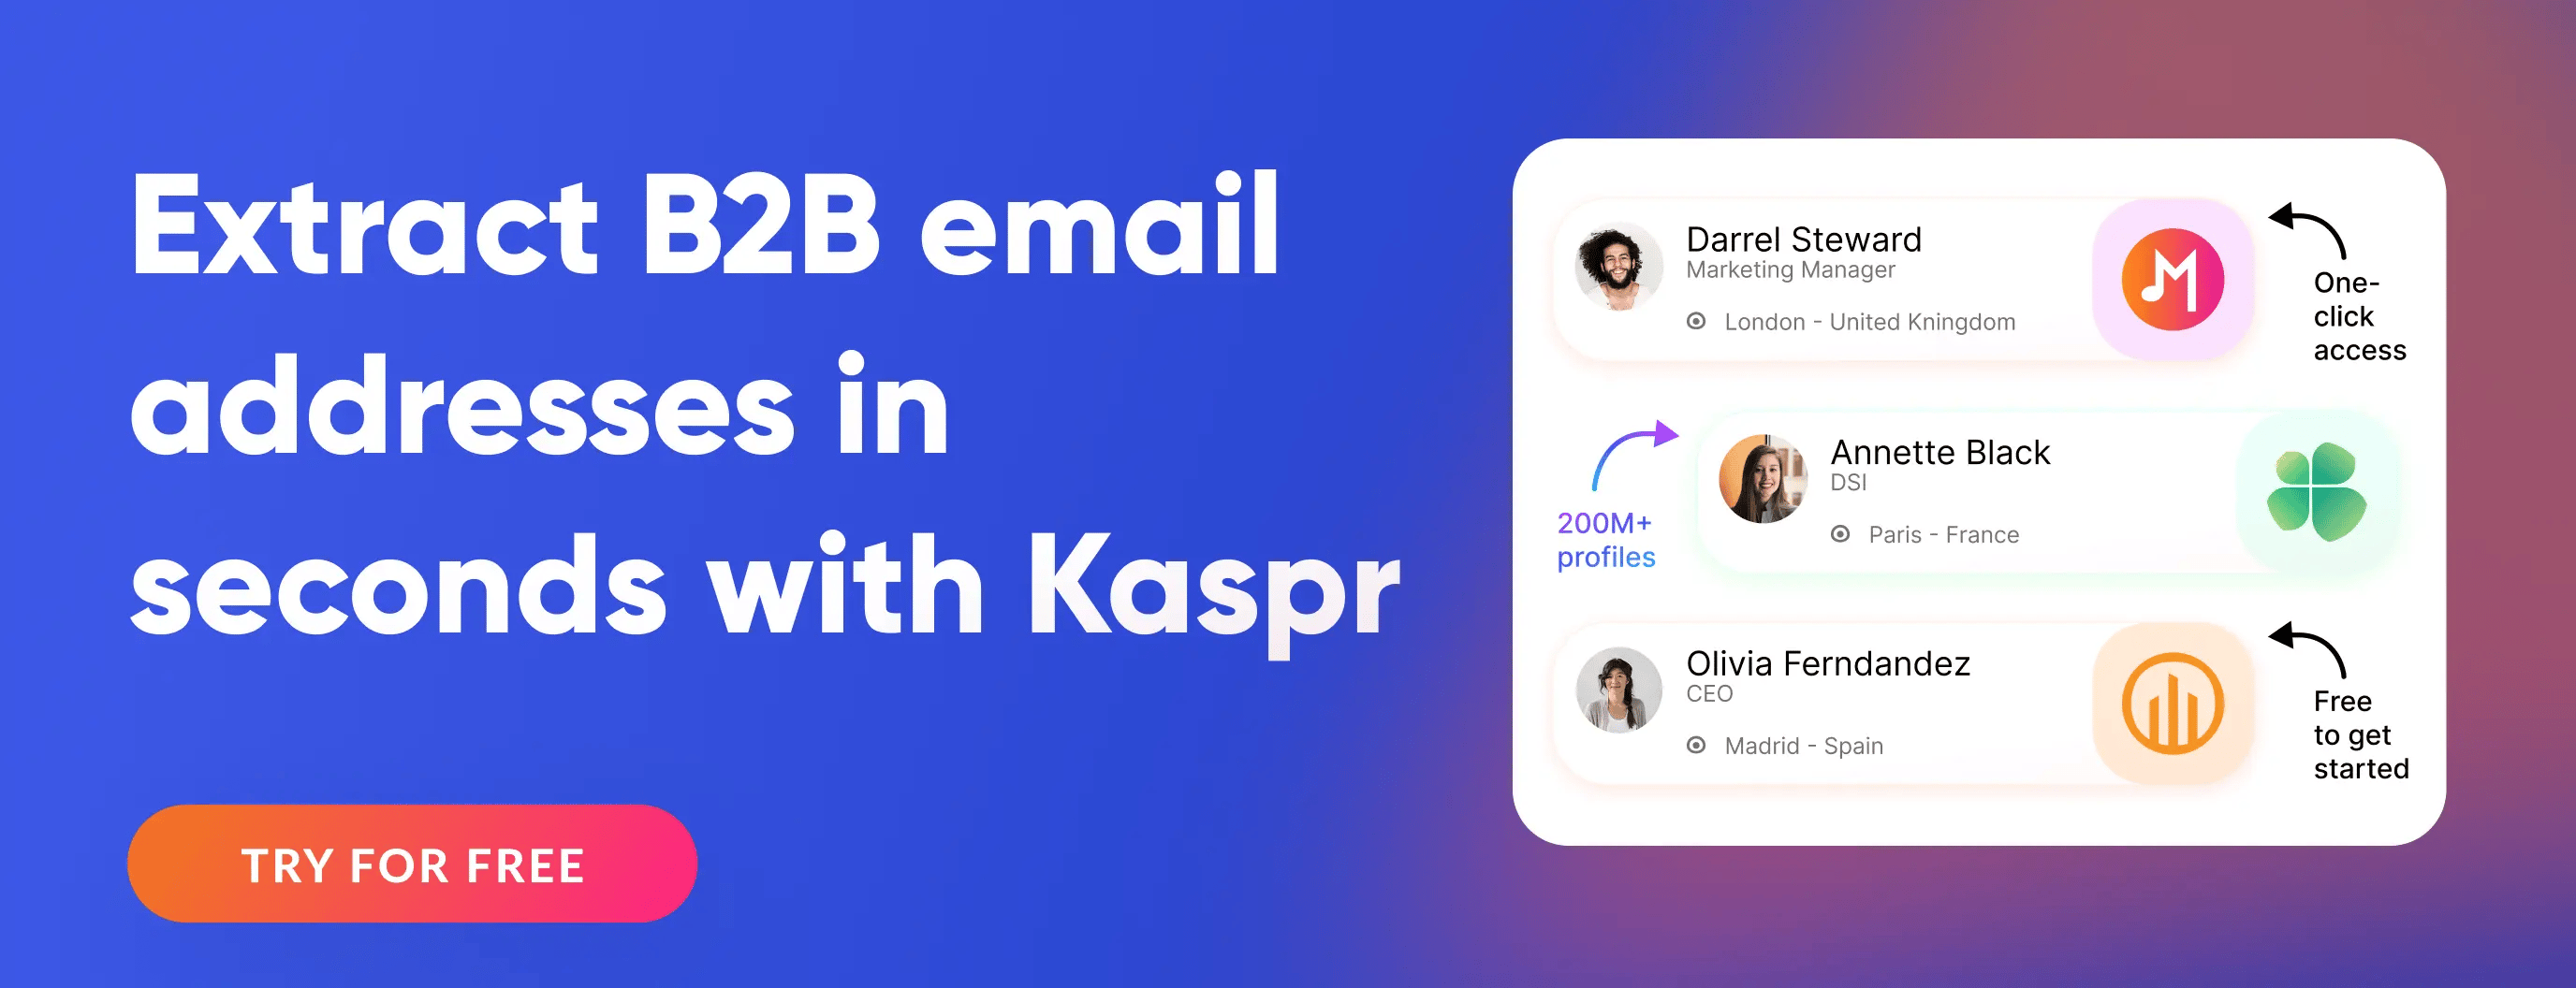 Blog banner CTA - Extract B2B email addresses in seconds with Kaspr